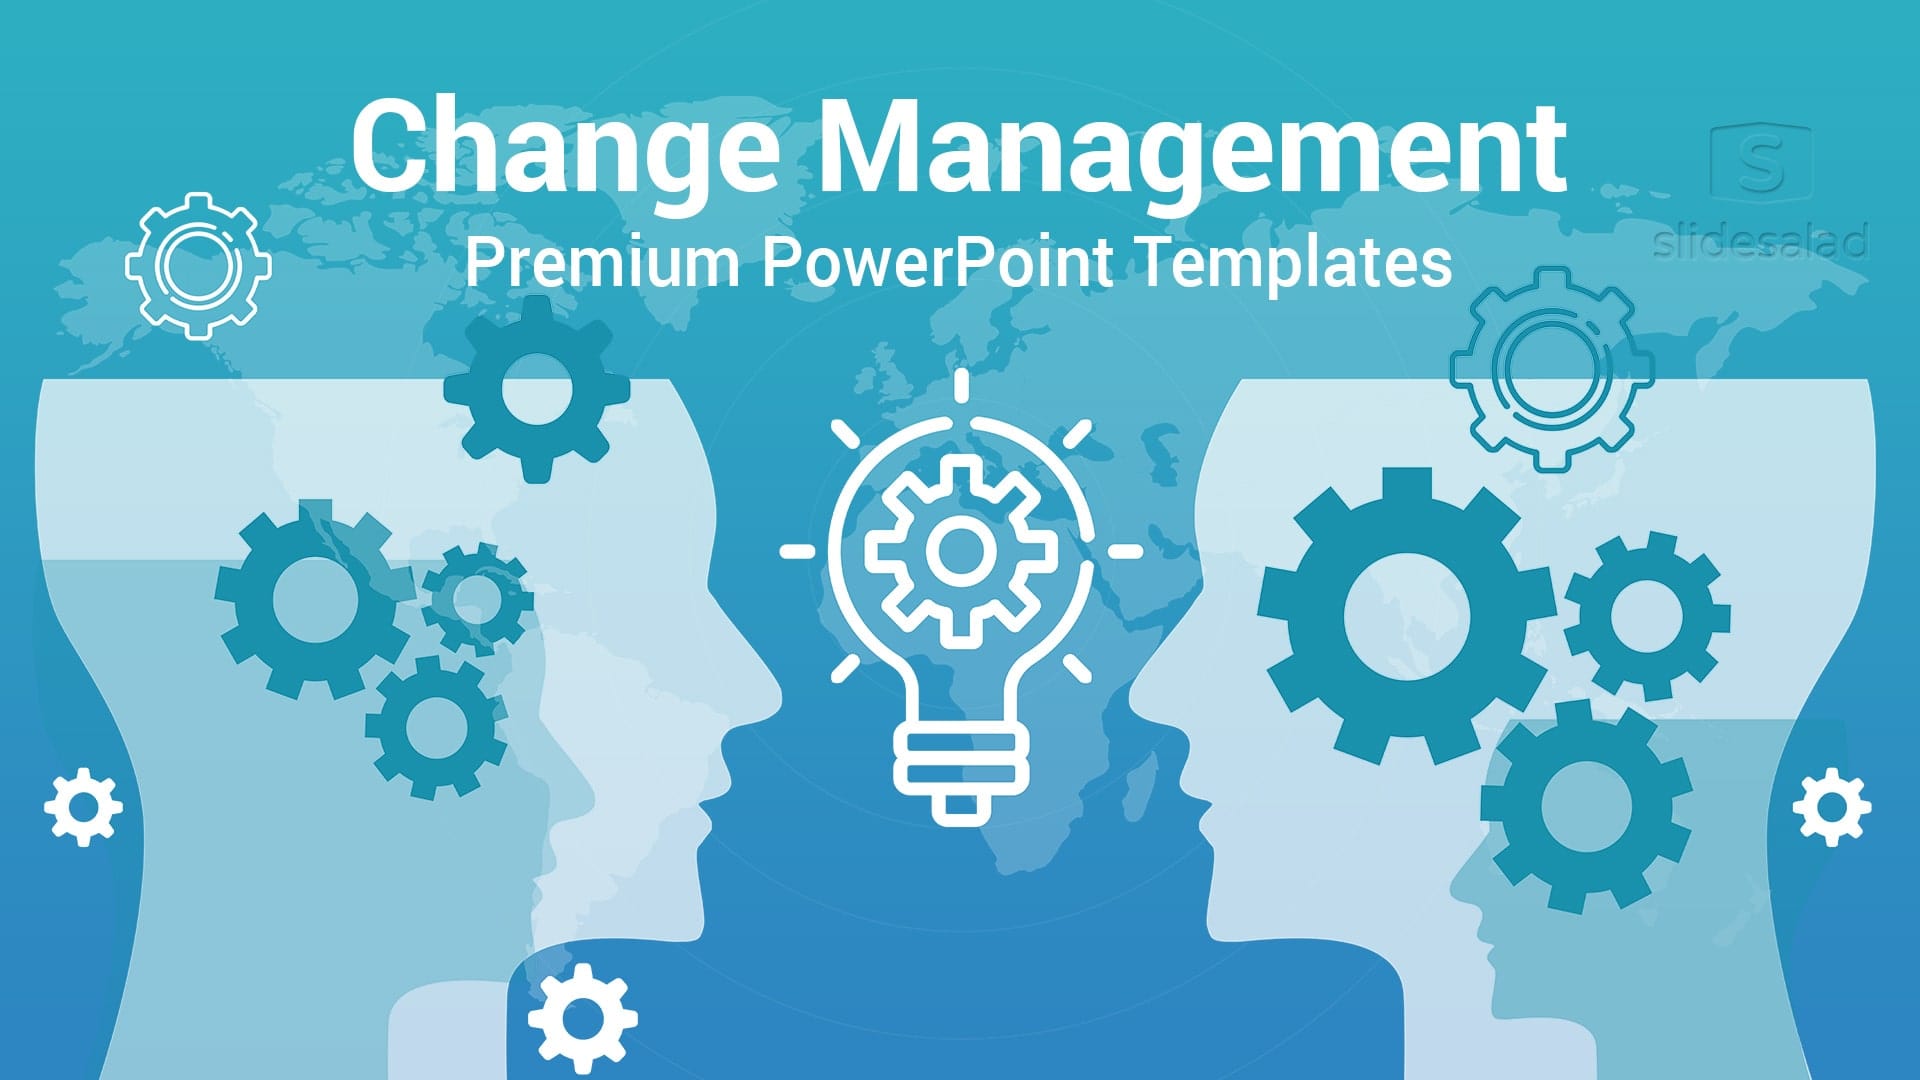 Change Management PowerPoint Template - All in One Change Management PPT Template and Slide Designs